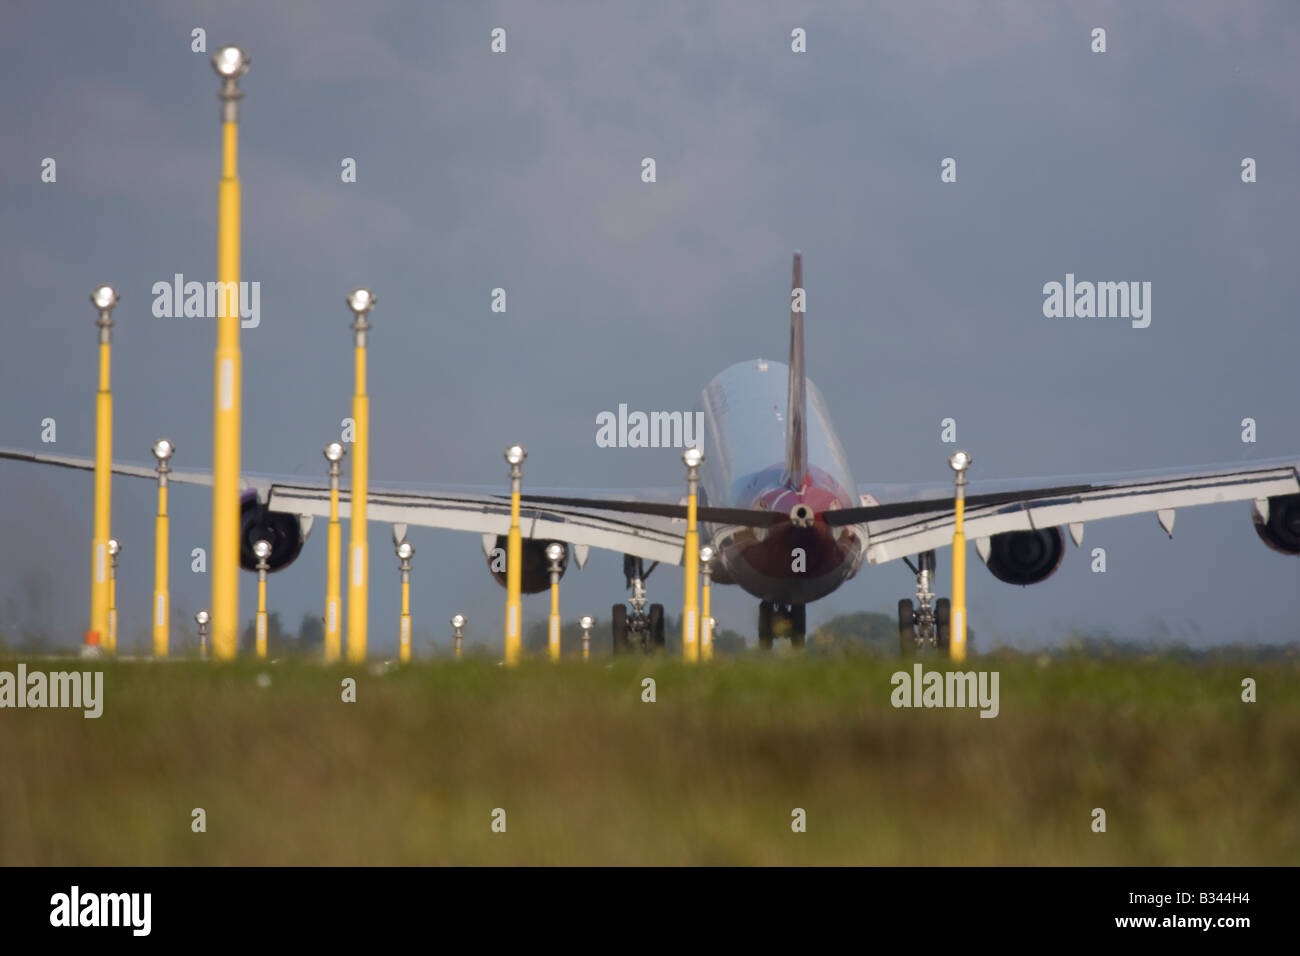 Commercial aeroplane on short final approach to London Heathrow Airport with landing lights in the foreground. Stock Photo